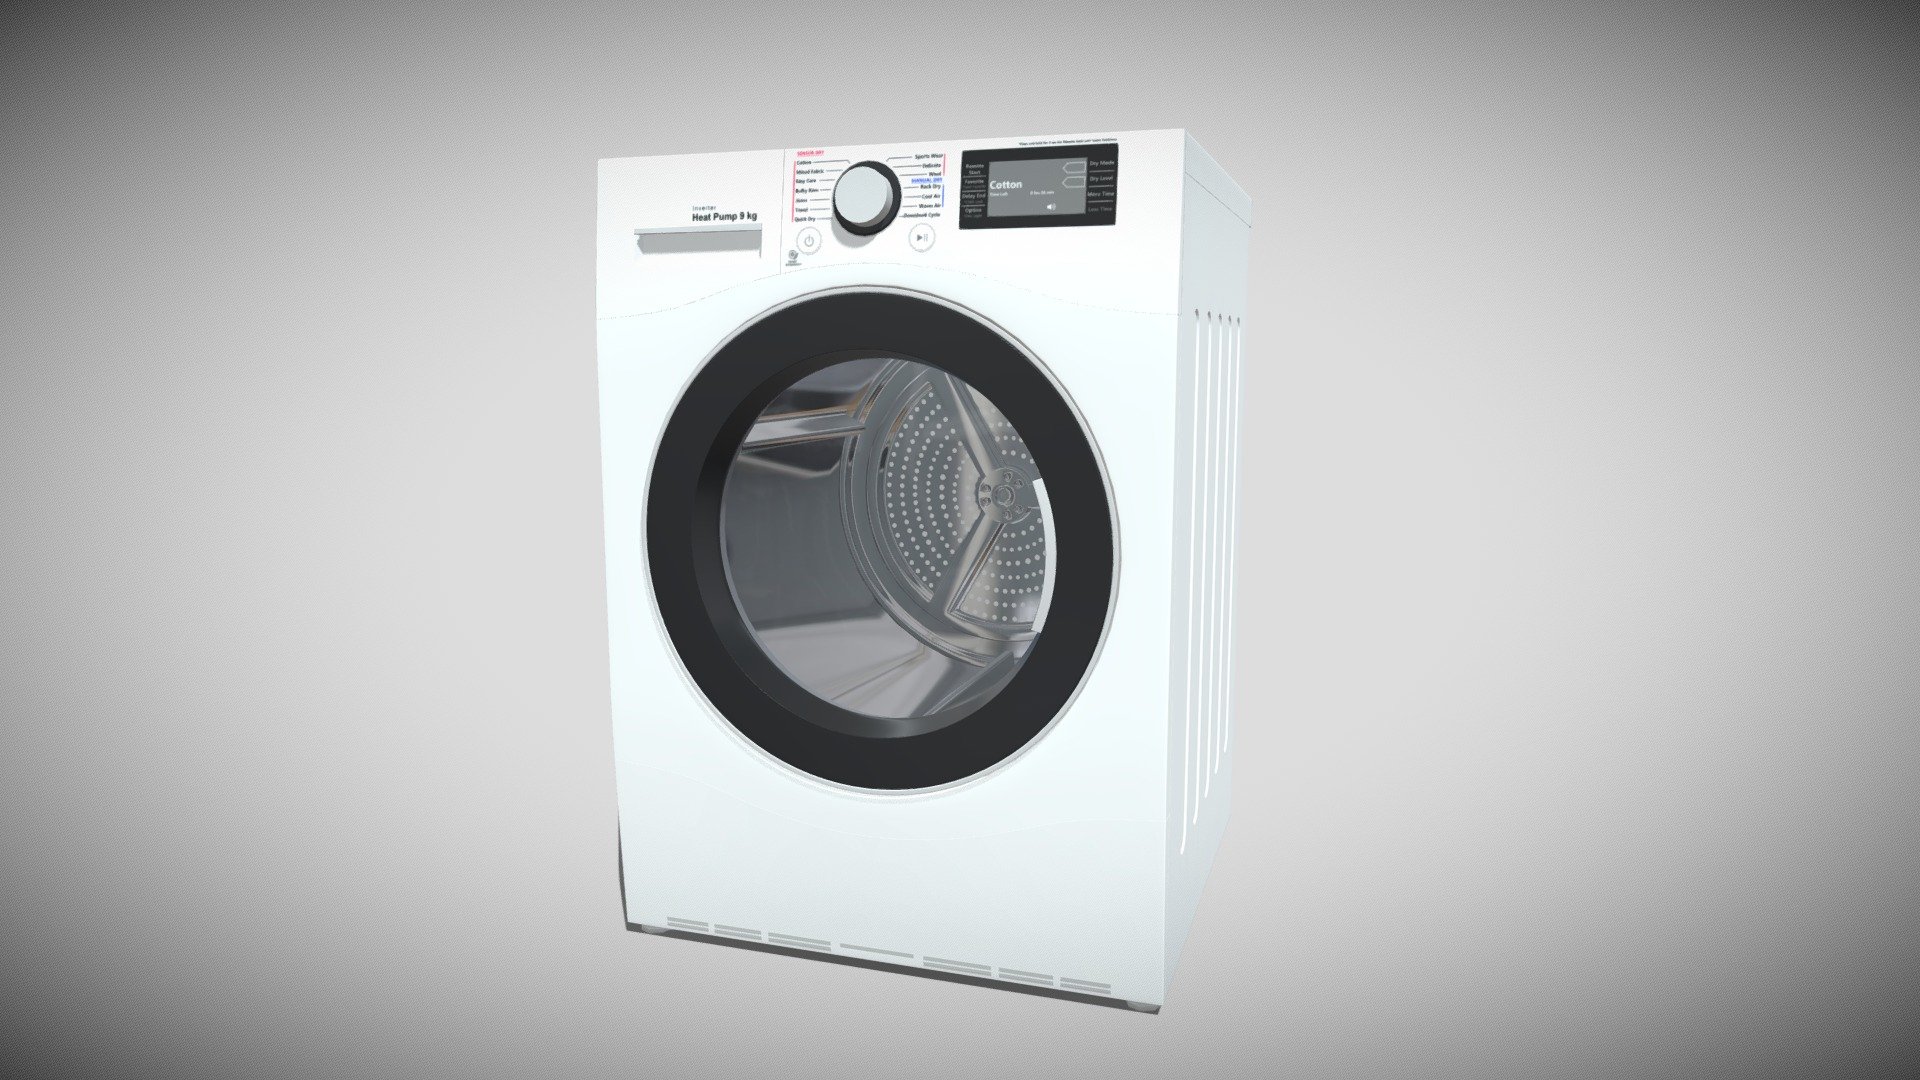 Detailed model of an LG Dryer, modeled in Cinema 4D.The model was created using approximate real world dimensions.

The model has 74,045 polys and 75,889 vertices.

An additional file has been provided containing the original Cinema 4D project files with both standard and v-ray materials, textures and other 3d export files such as 3ds, fbx and obj 3d model